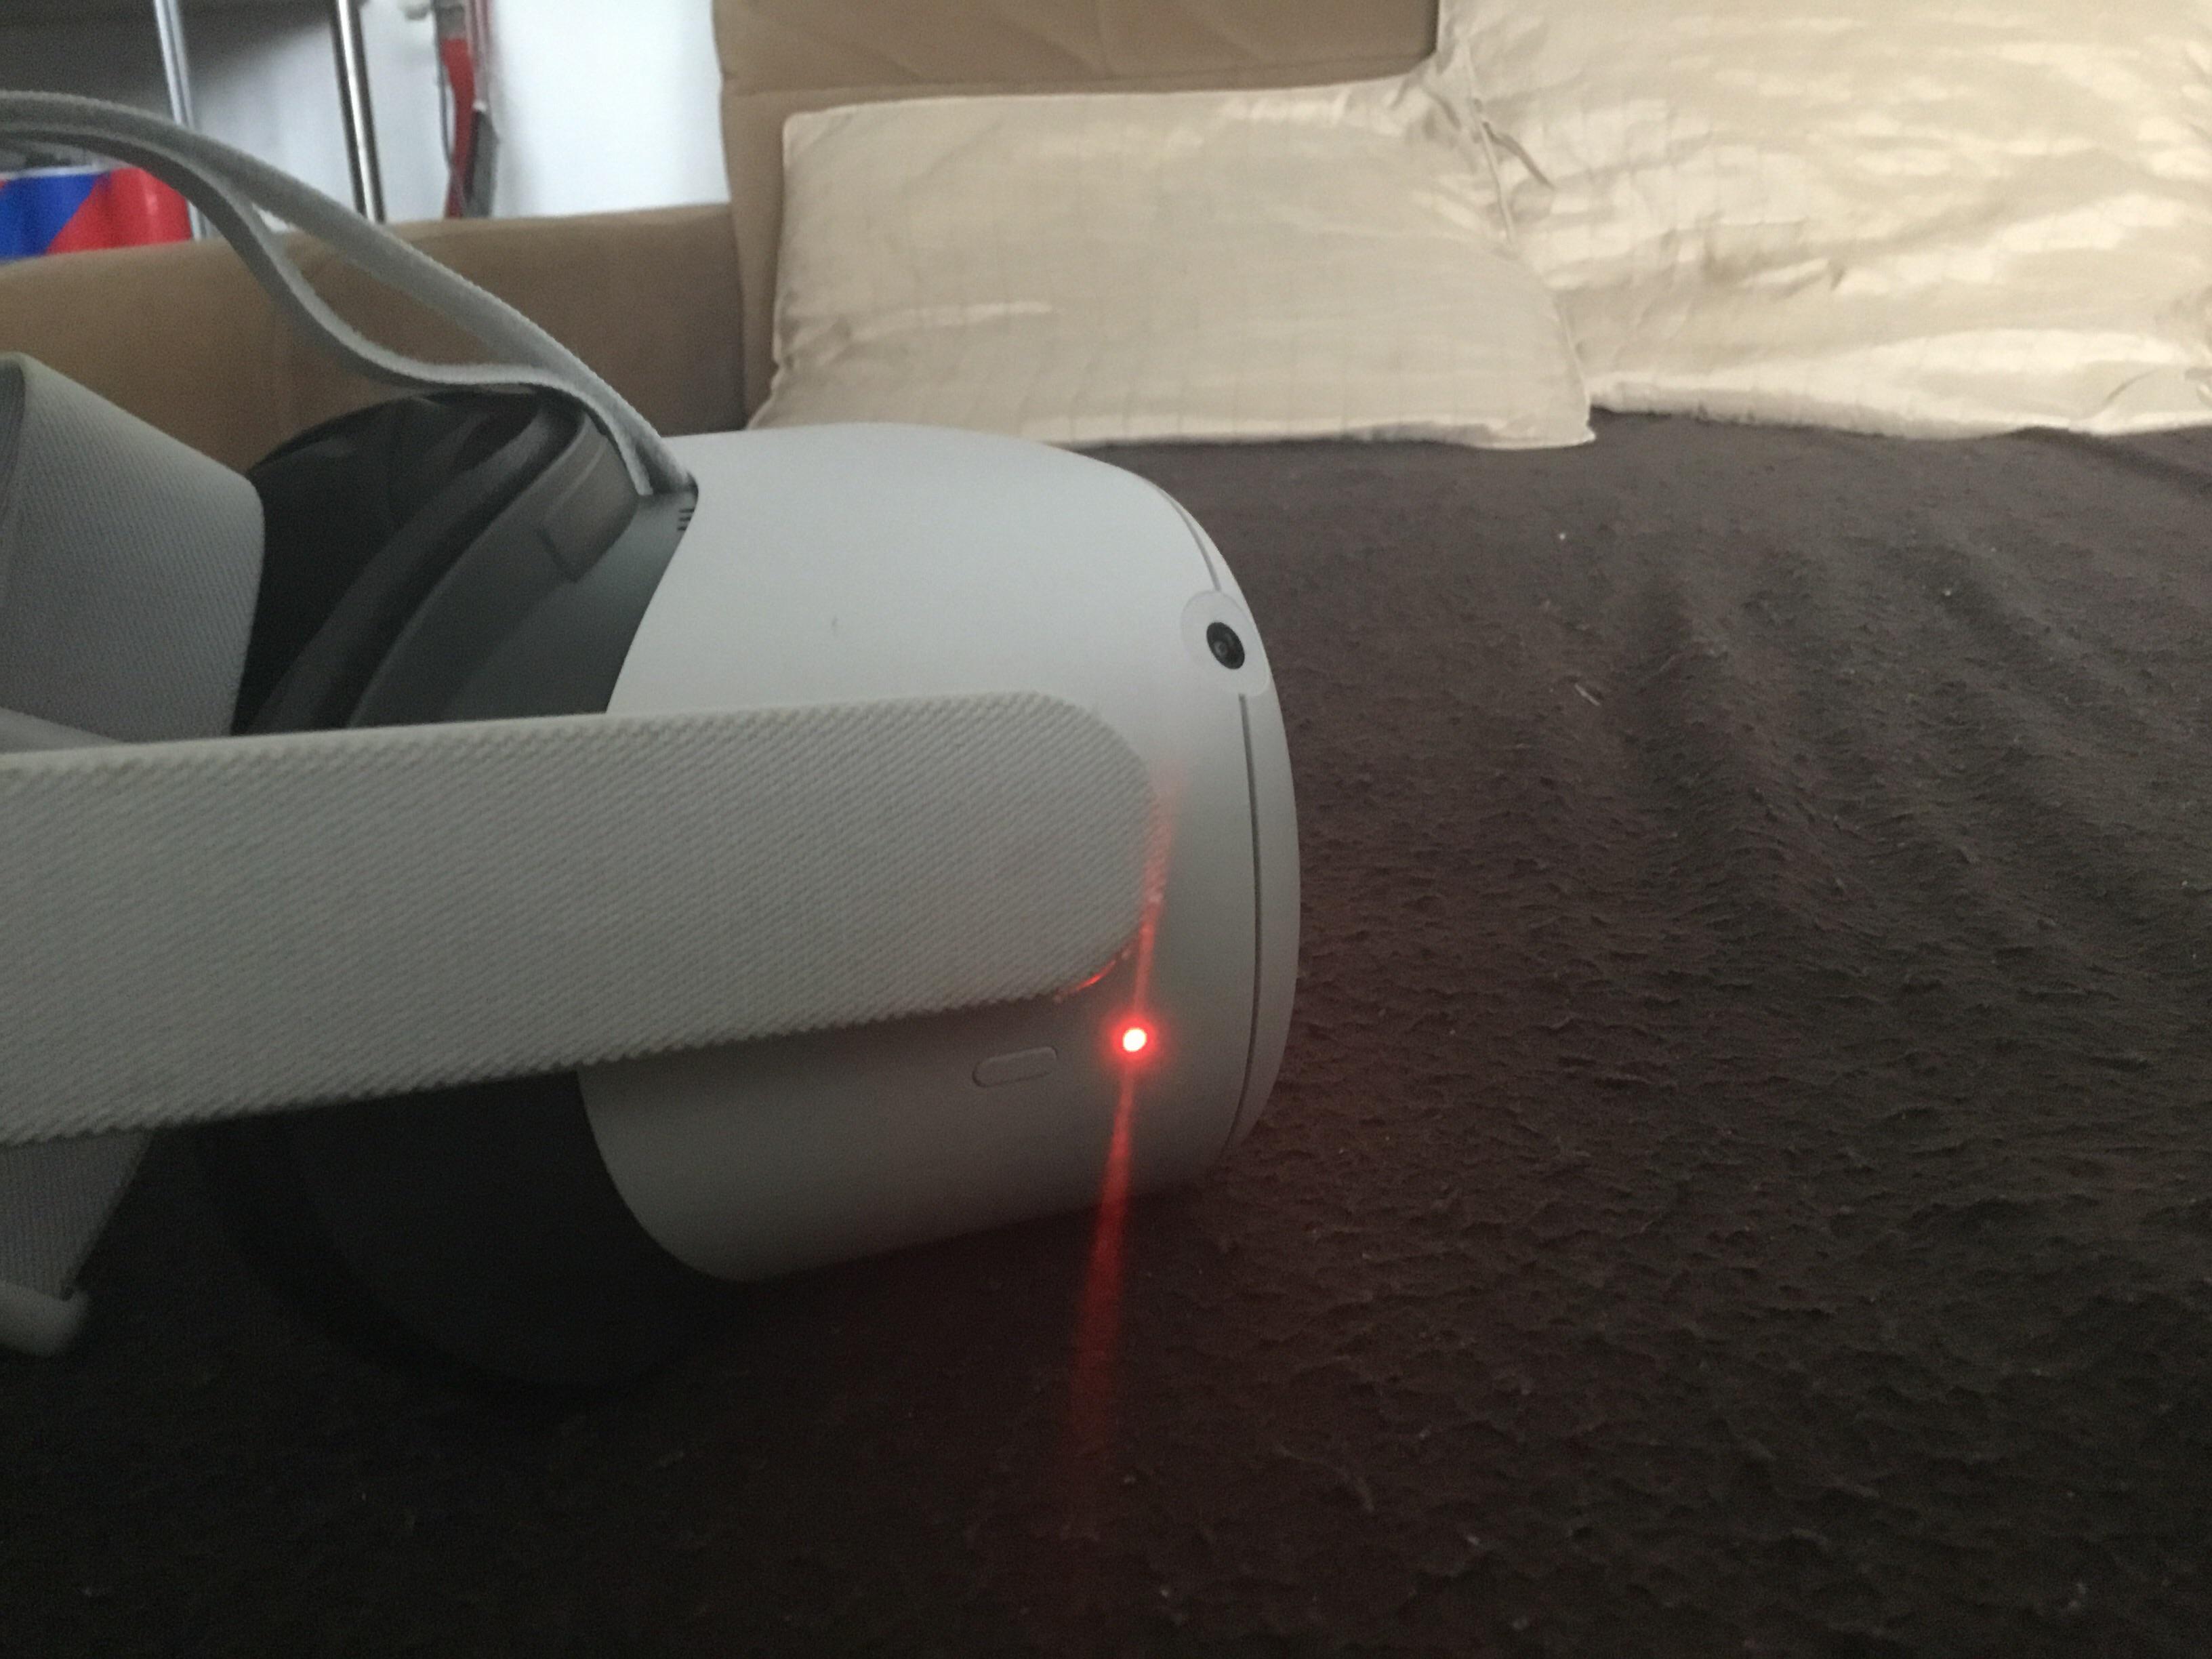 How to Fix the Red LED Issue on Quest 2 Charging? 3